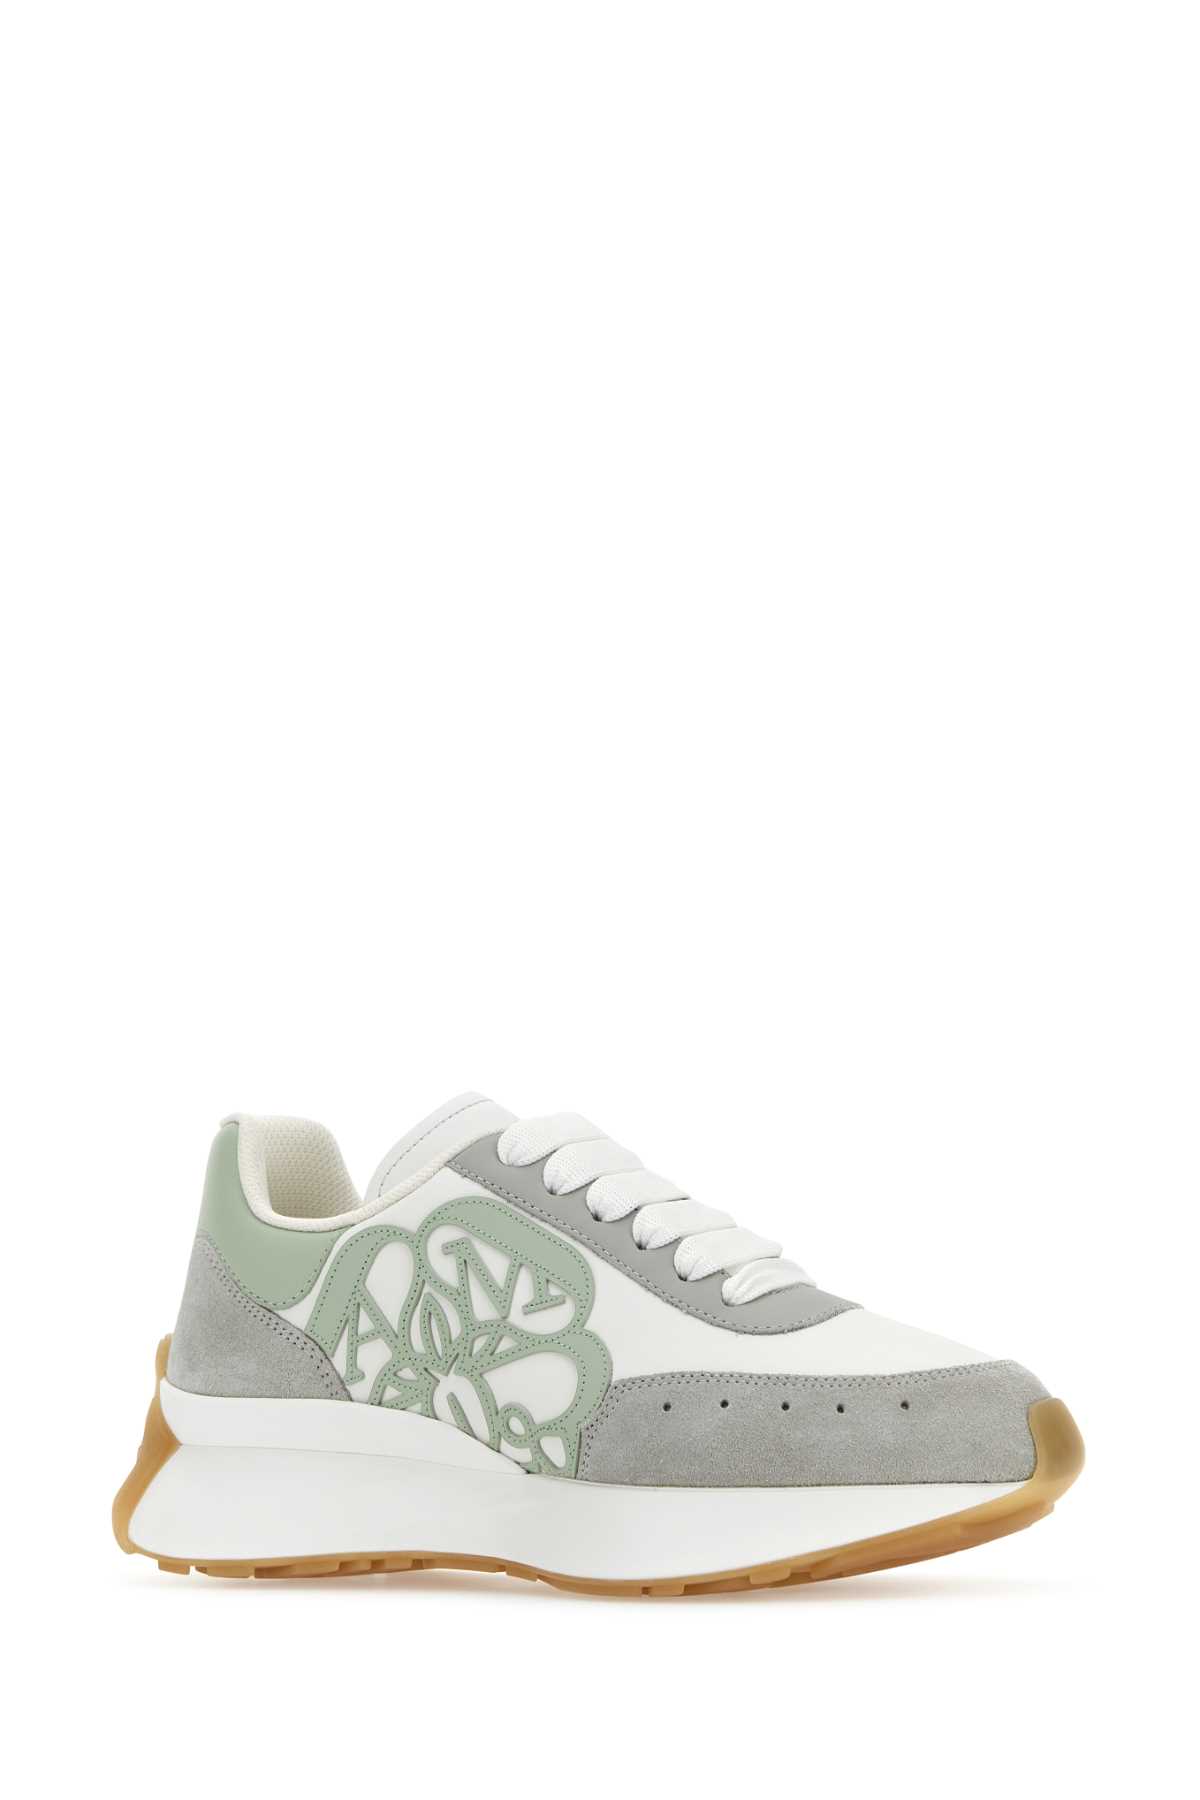 ALEXANDER MCQUEEN MULTICOLOR LEATHER AND SUEDE SPRINT RUNNER SNEAKERS